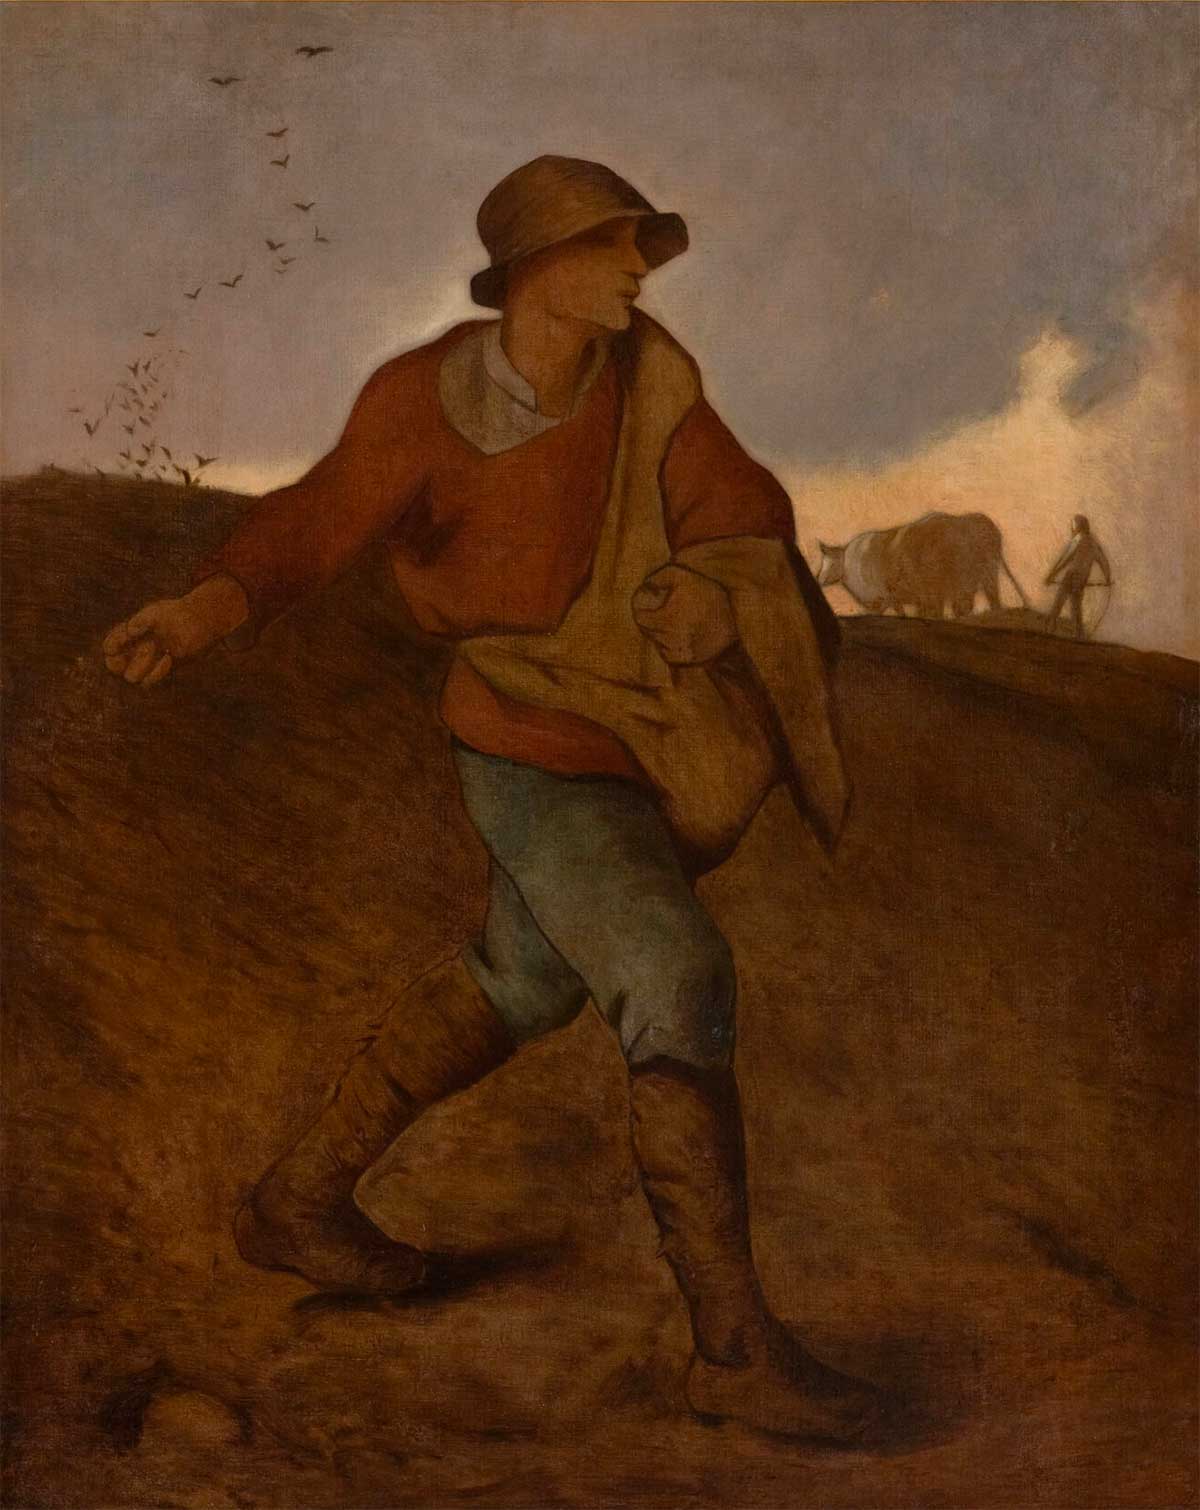 Painting of a person slinging seeds from a bag while striding down a hill